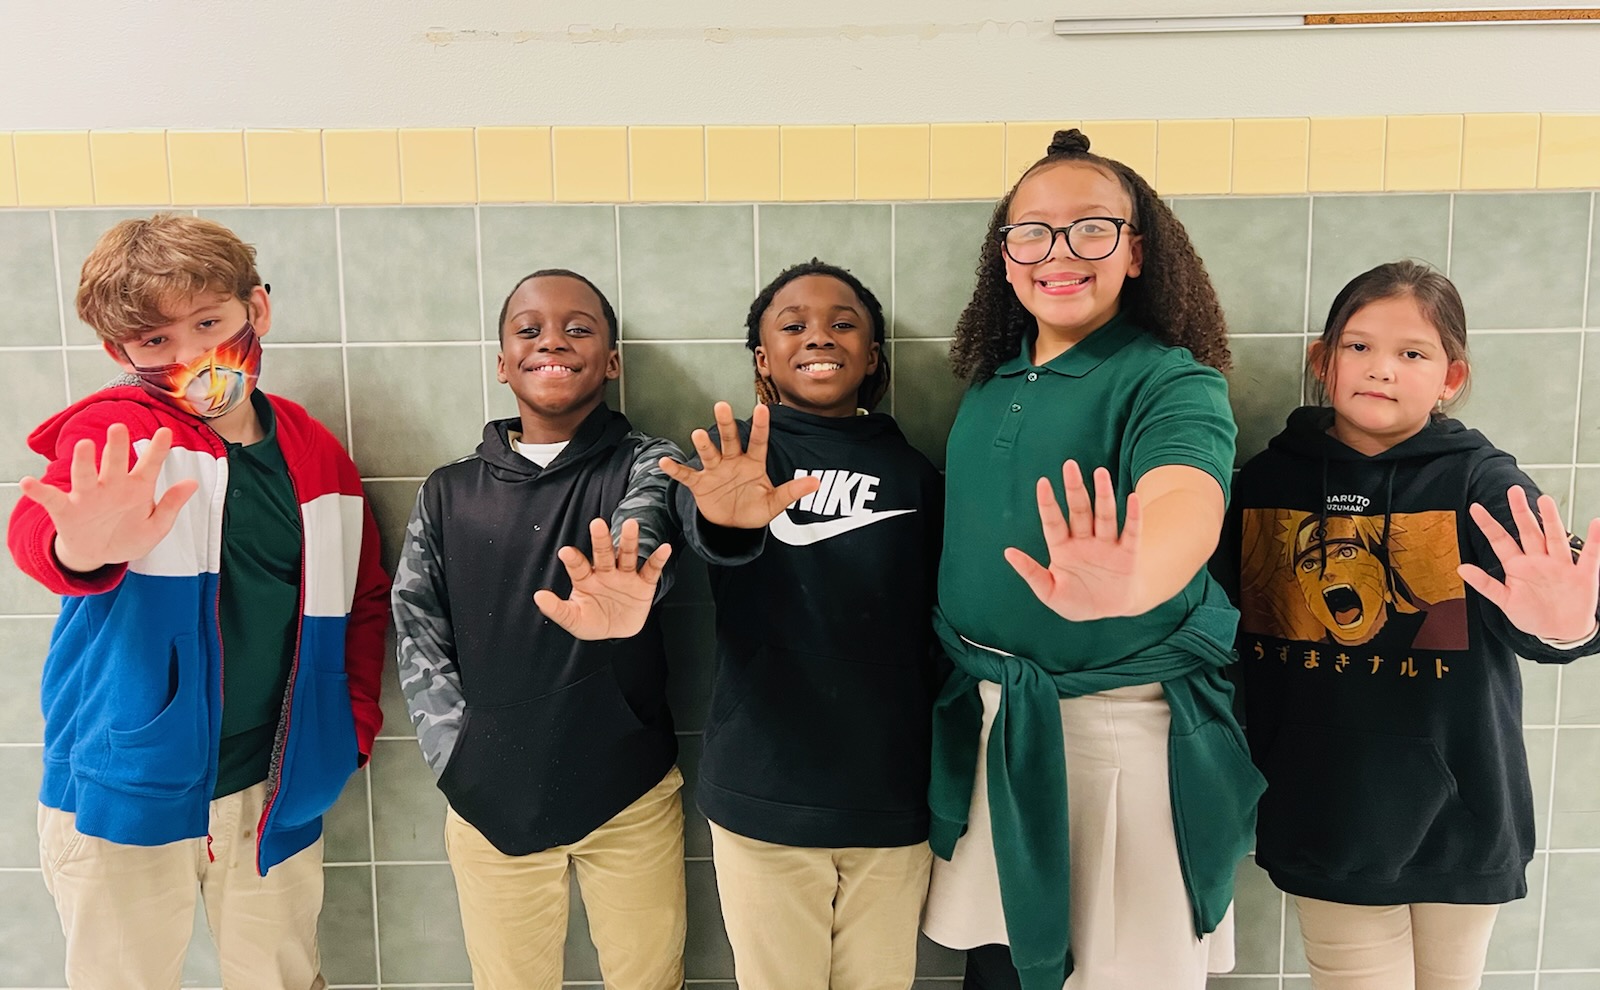 5 Students giving the High 5 sign